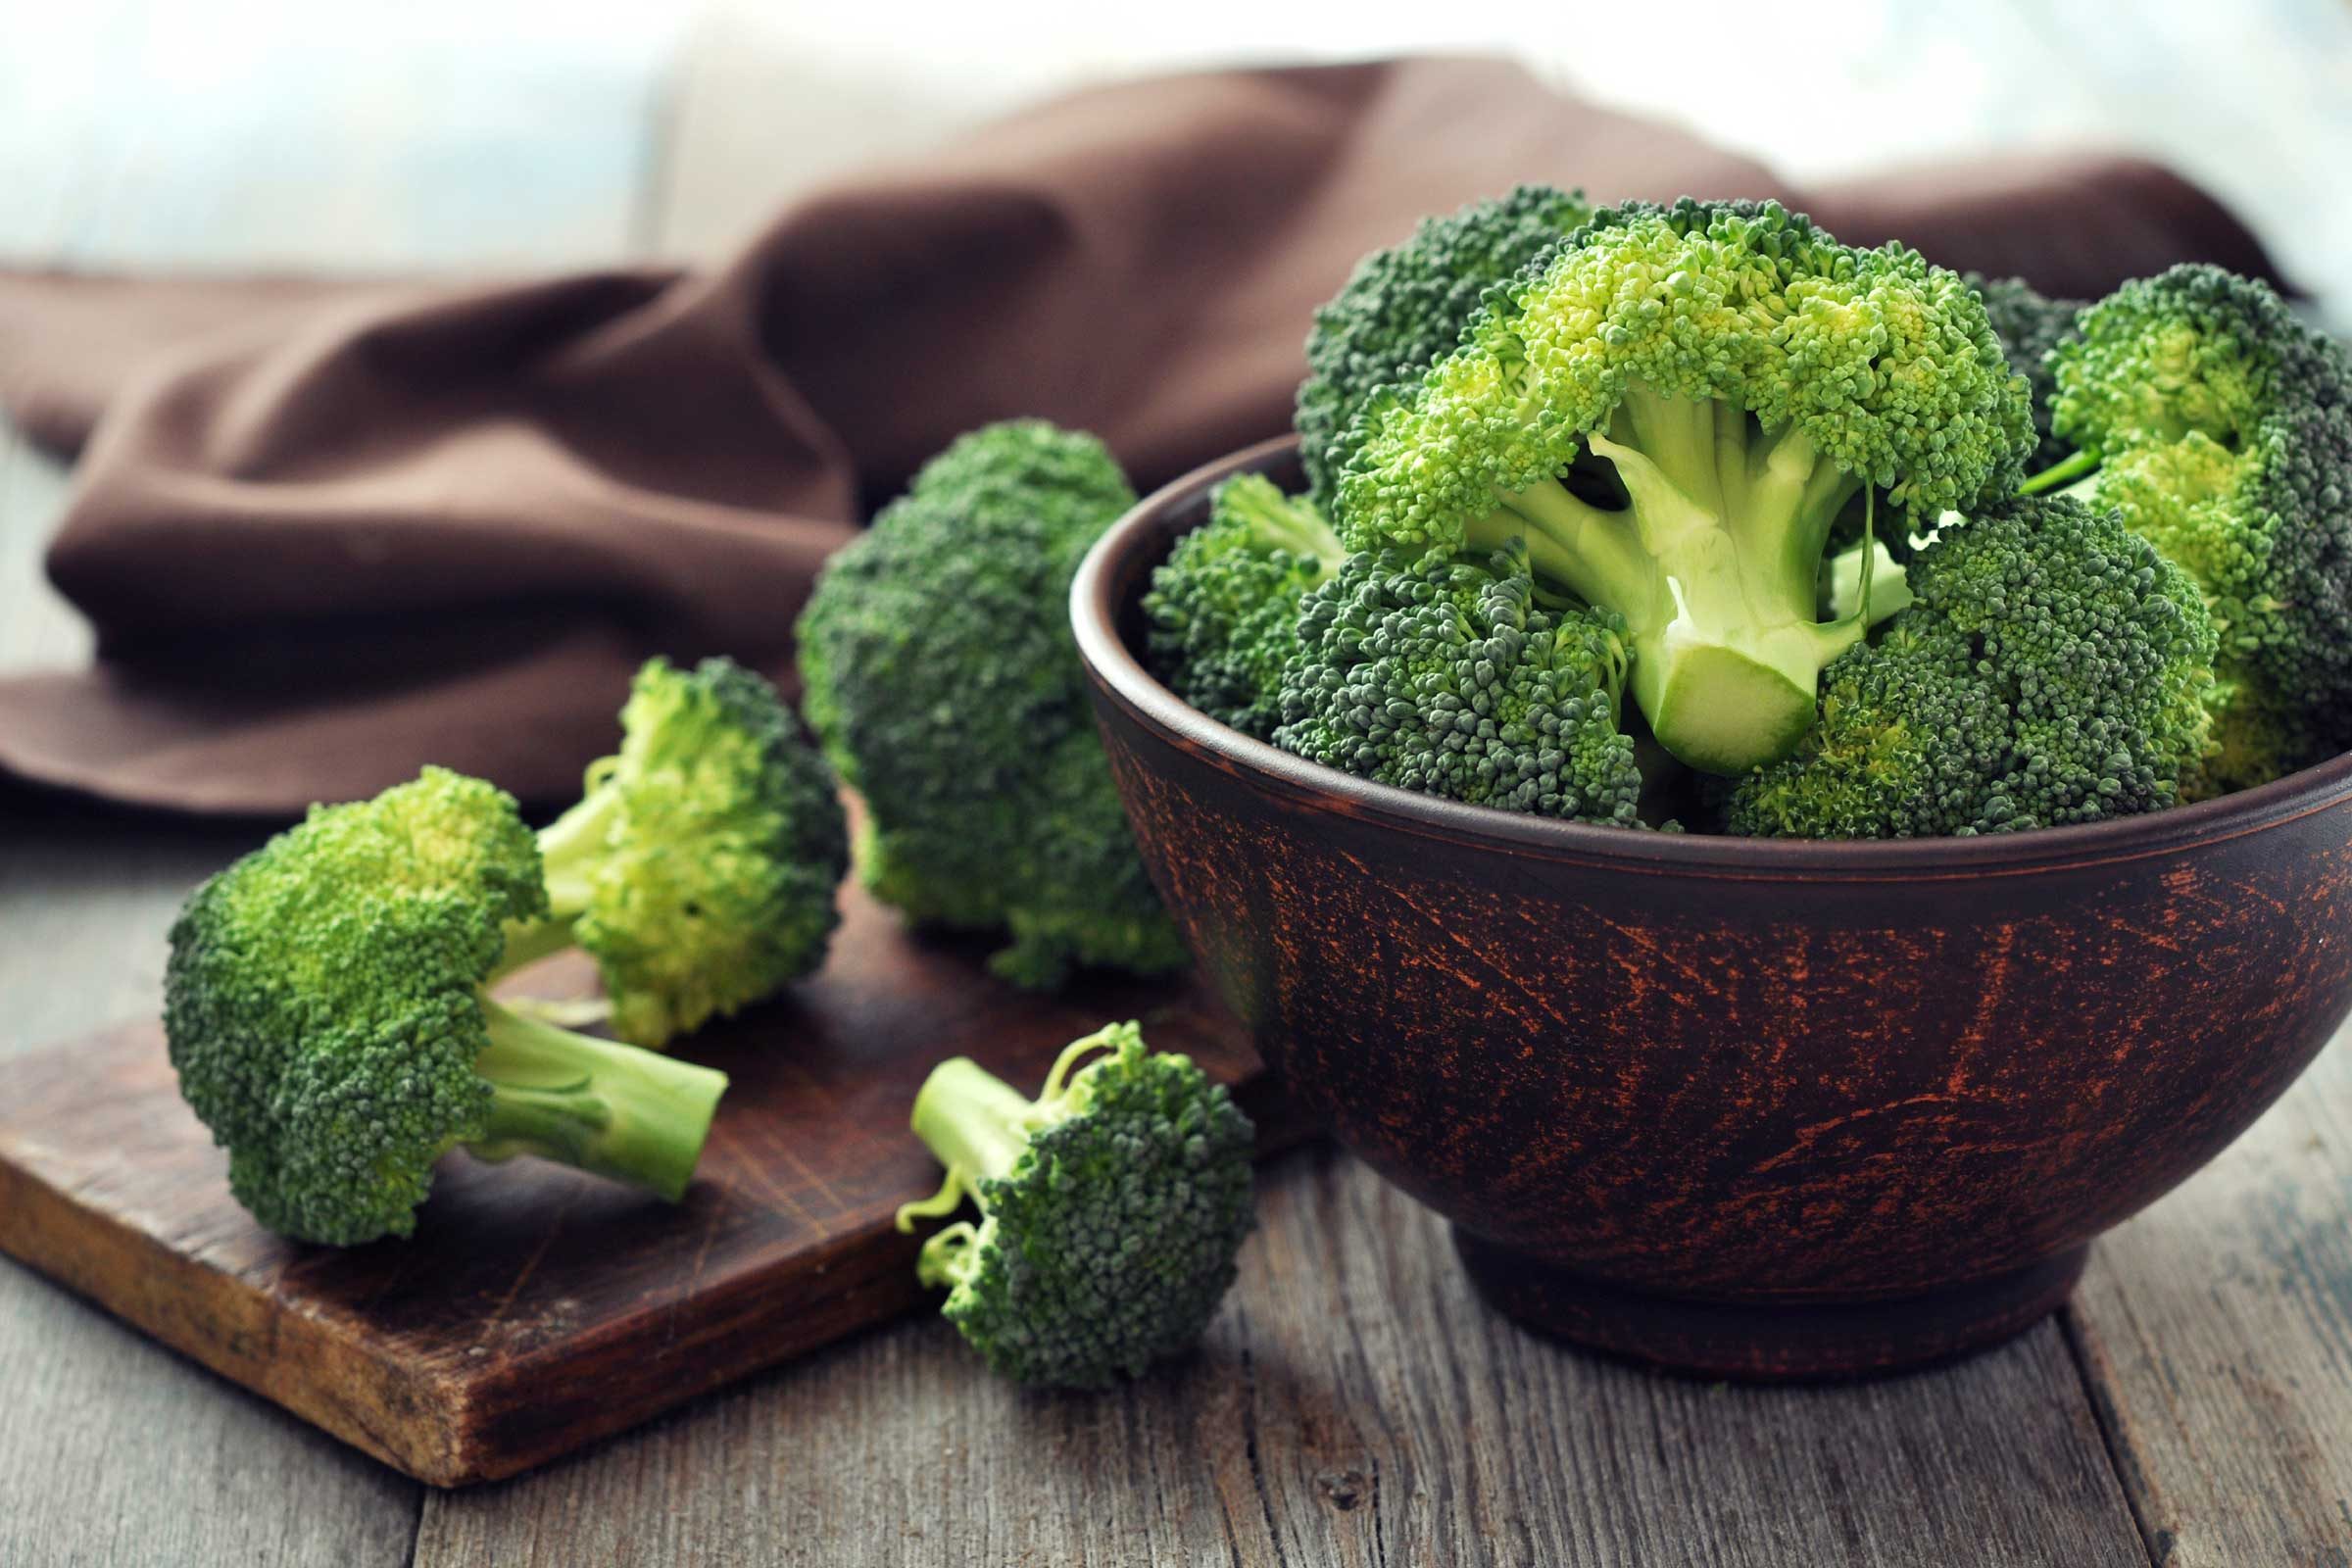 Eat your fill of broccoli, but steam it rather than microwaving it